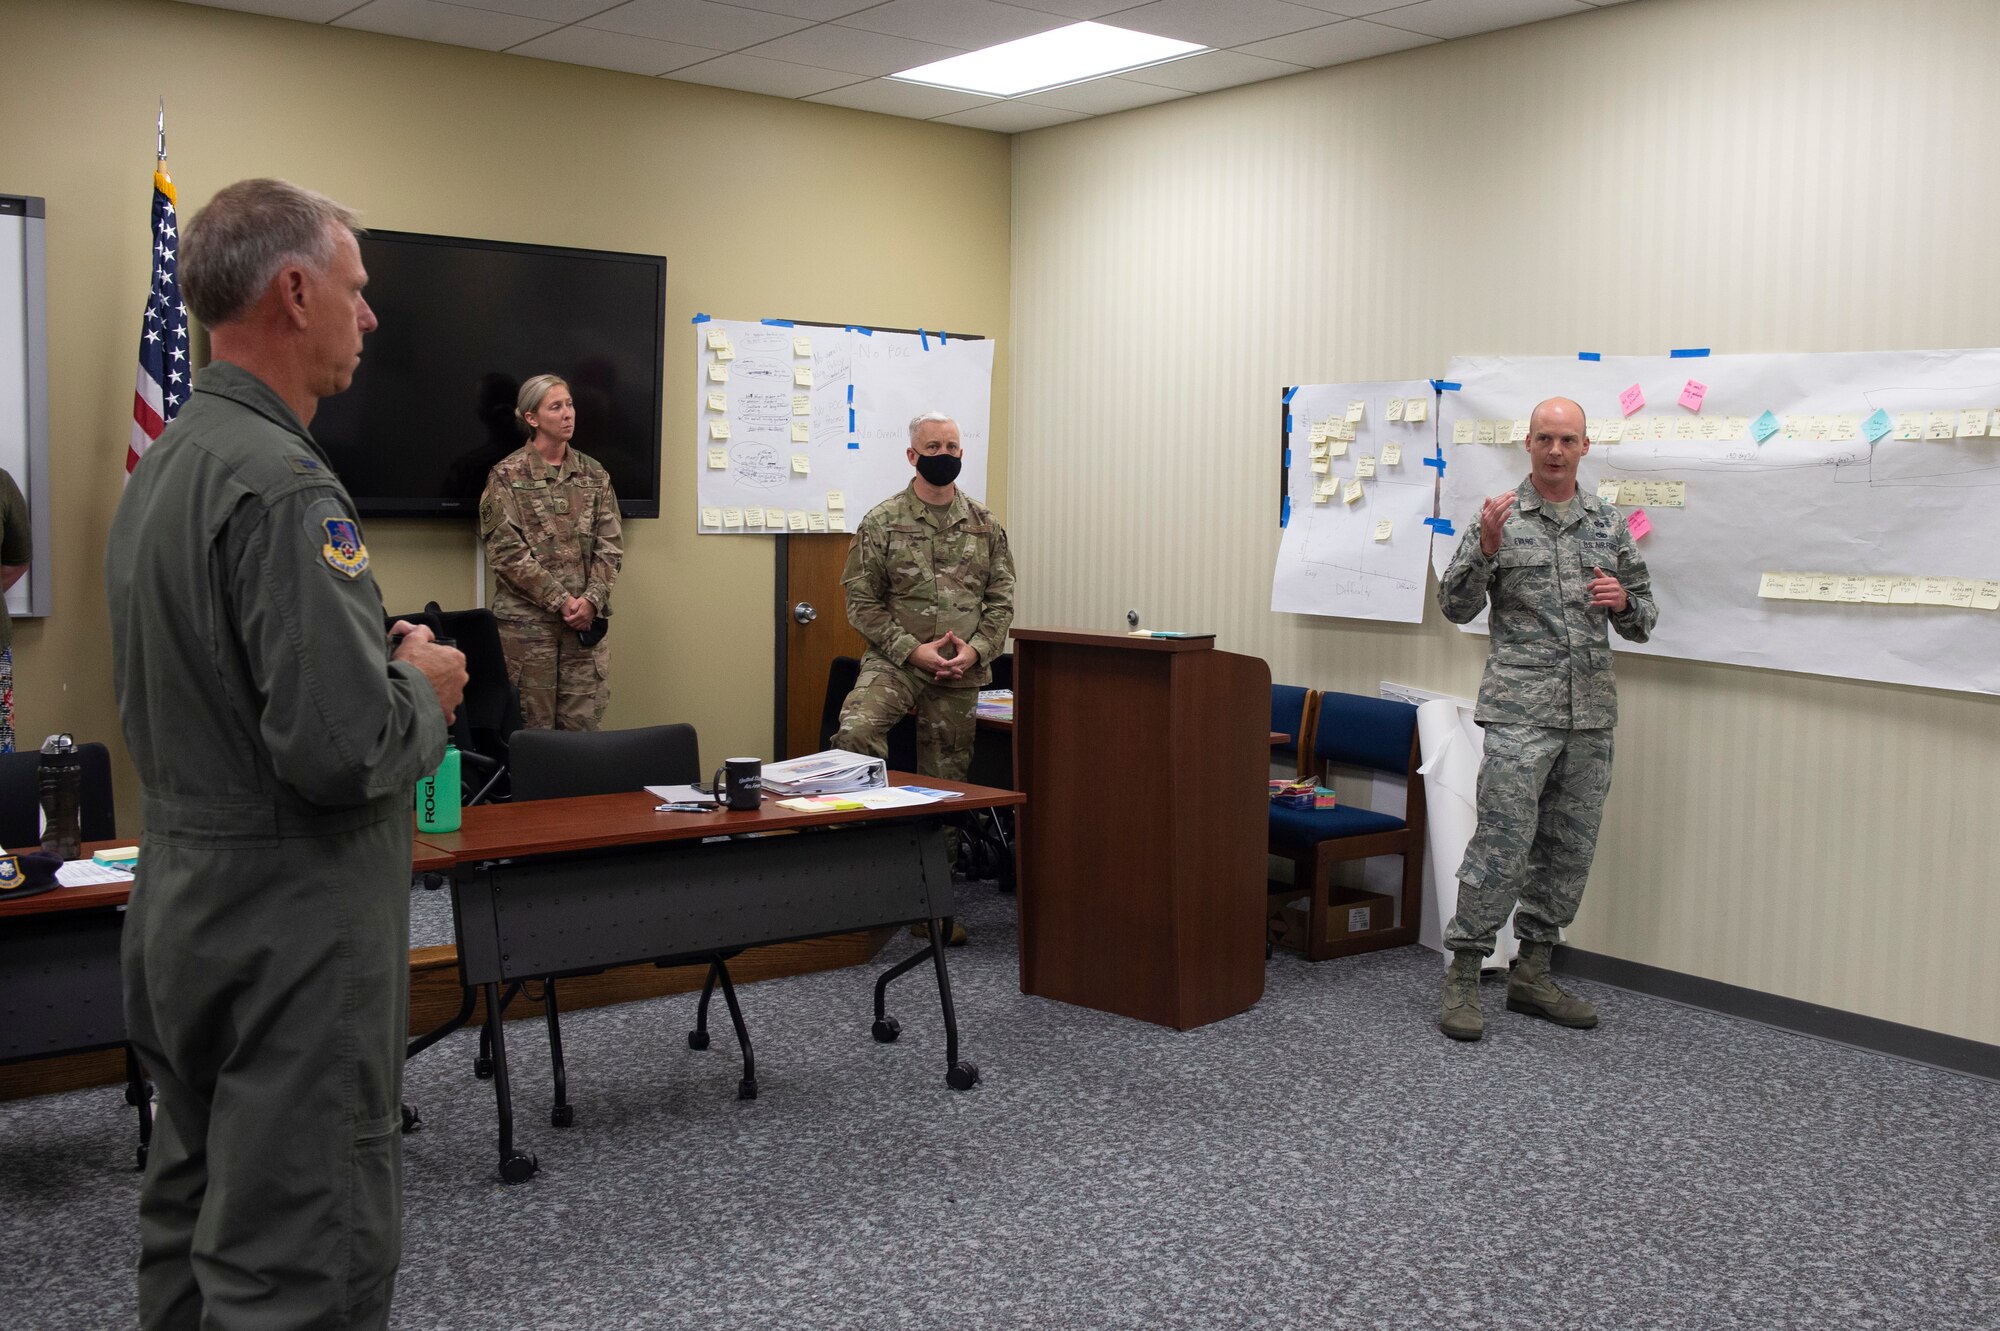 Master Sgt. Adam Evans, provides his part in a presentation during the continuous process improvement program to Col. Larry Shaw, 434th Air Refueling Wing commander, at Grissom Air Reserve Base, Indiana, July 30, 2020. The continuous process improvement team focused their efforts on improving the administrative discharge packages process. Their goal was to reach the Air Force standard on these packages while receiving 100 percent accuracy. (U.S. Air Force photo by Senior Airman Michael Hunsaker)